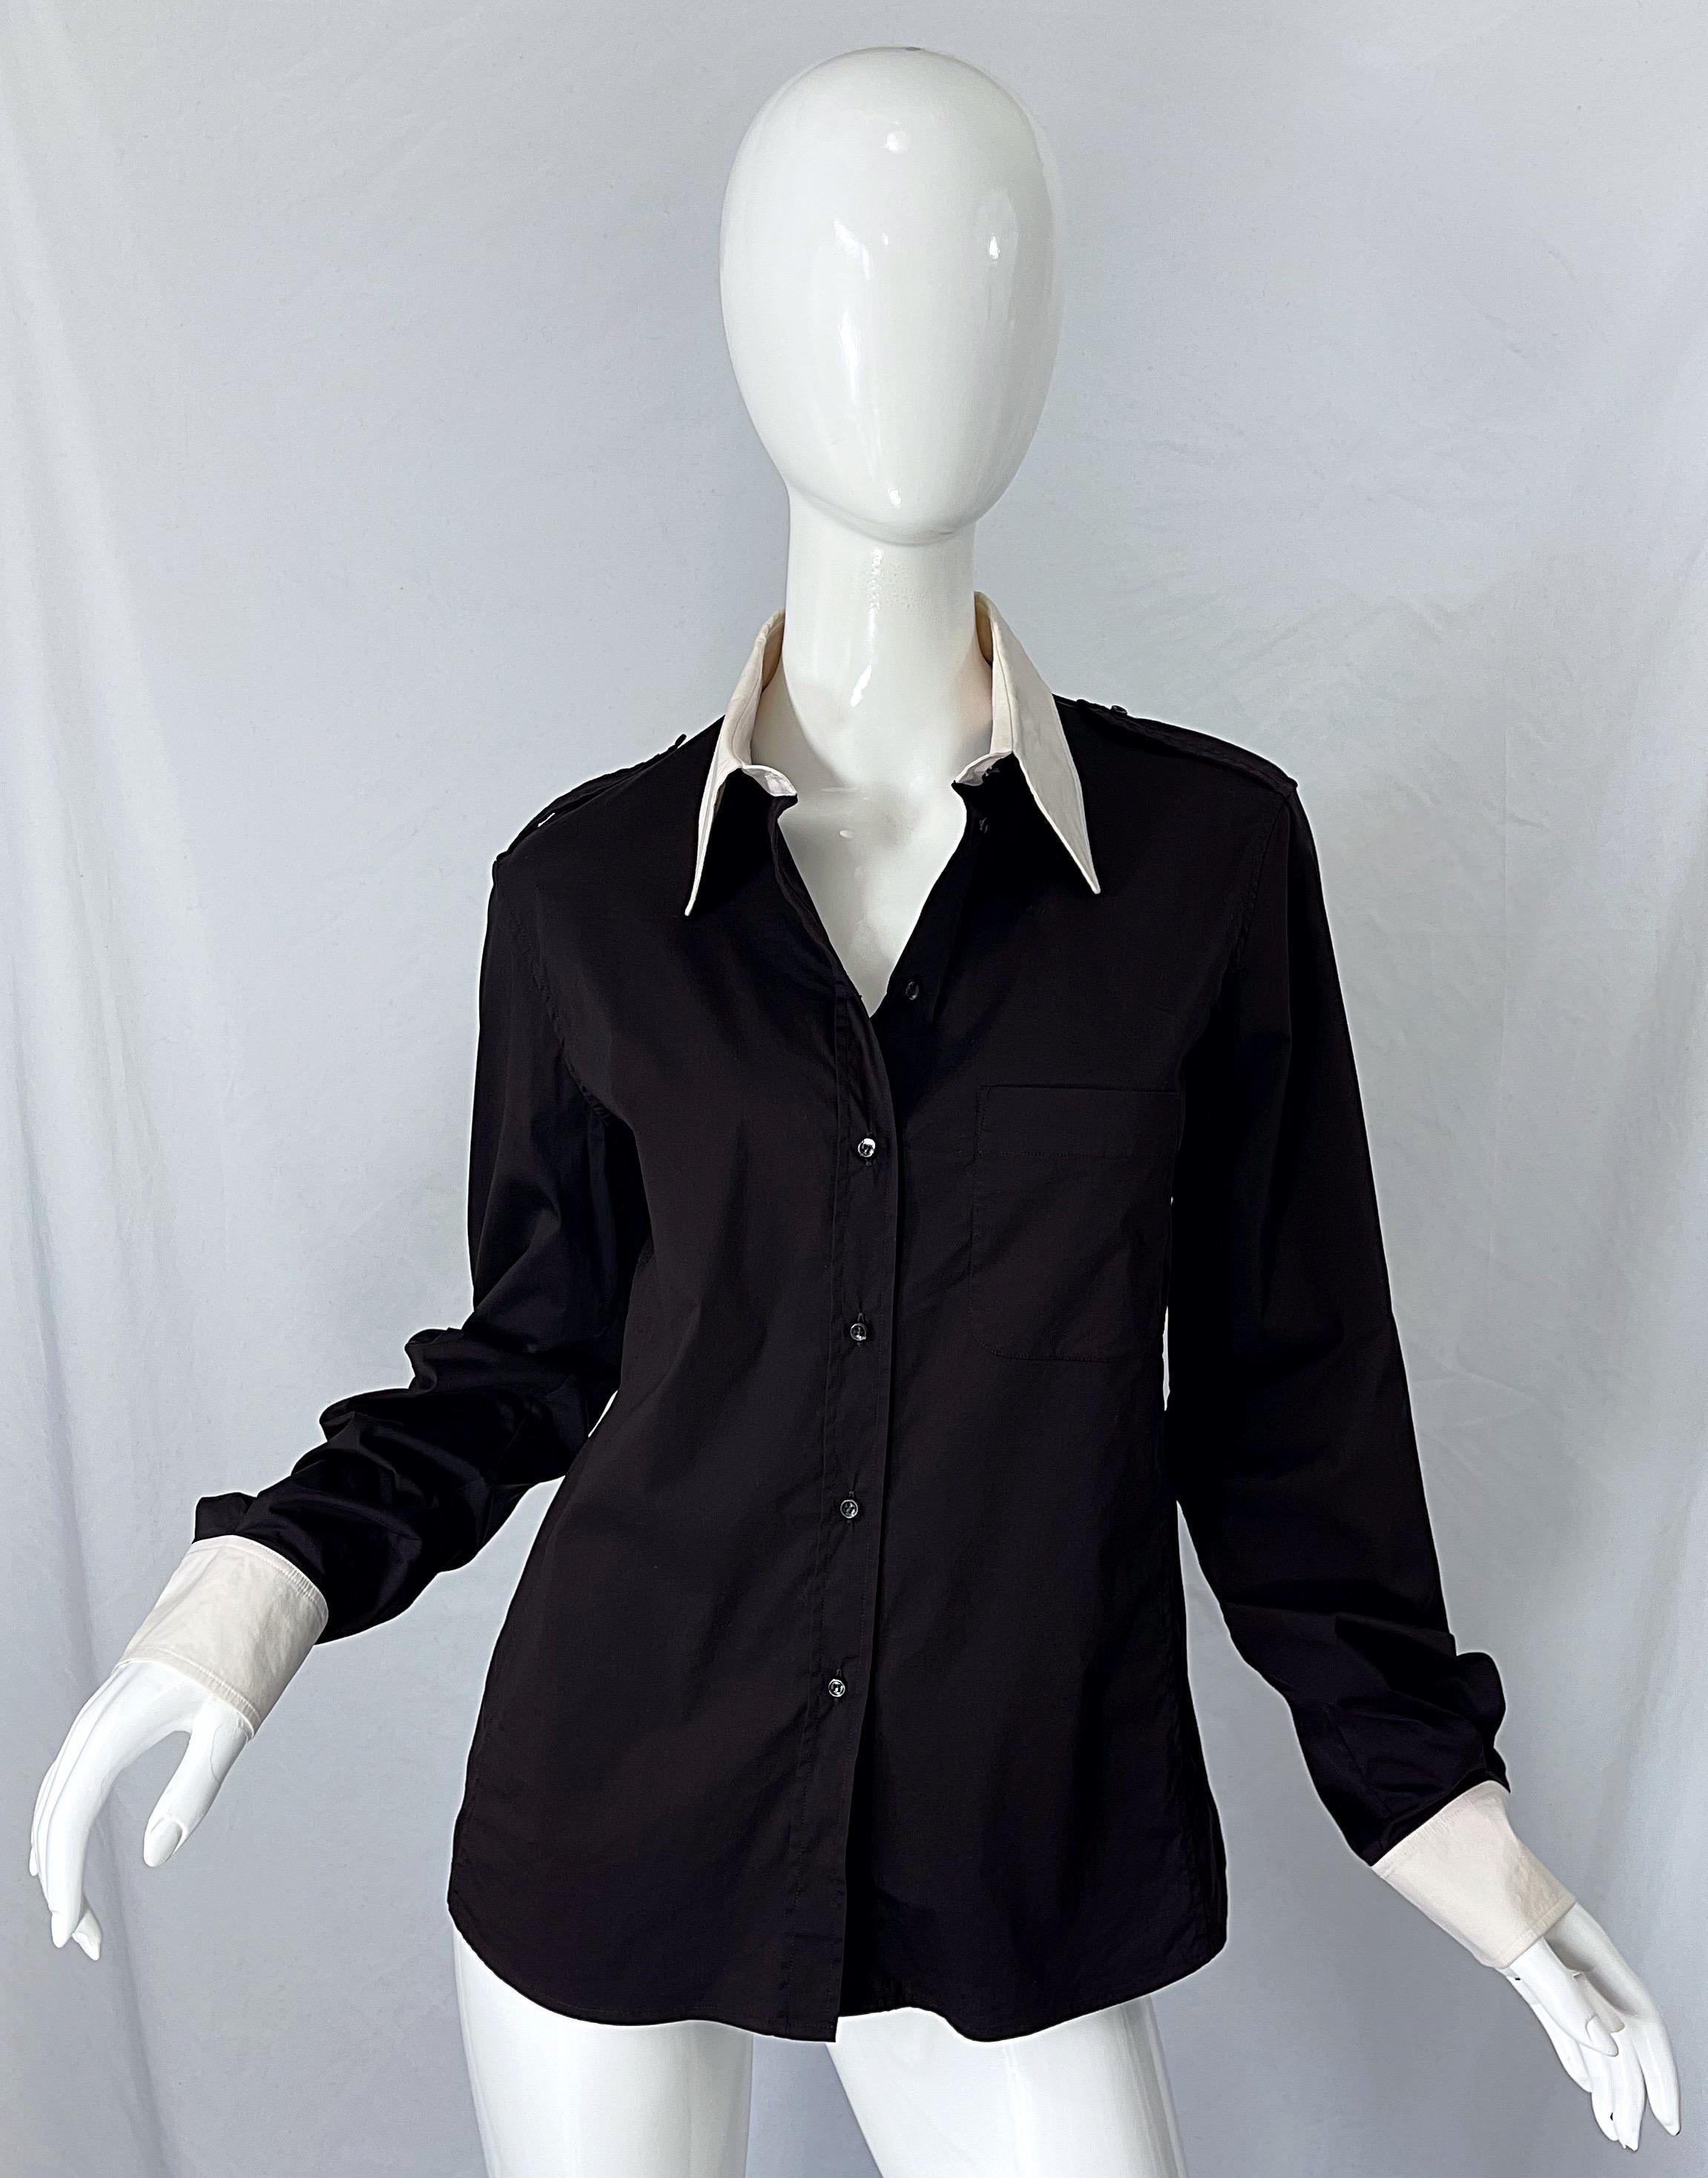 Chic YVES SAINT LAURENT YSL by TOM FORD black and white button up shirt ! Features a stylish tailored fit. White collar and cuffs. Soft cotton blend fabric has some stretch. 65% Cotton, 29% Nylon, 6% Spandex
Can easily be dressed up or down. Great